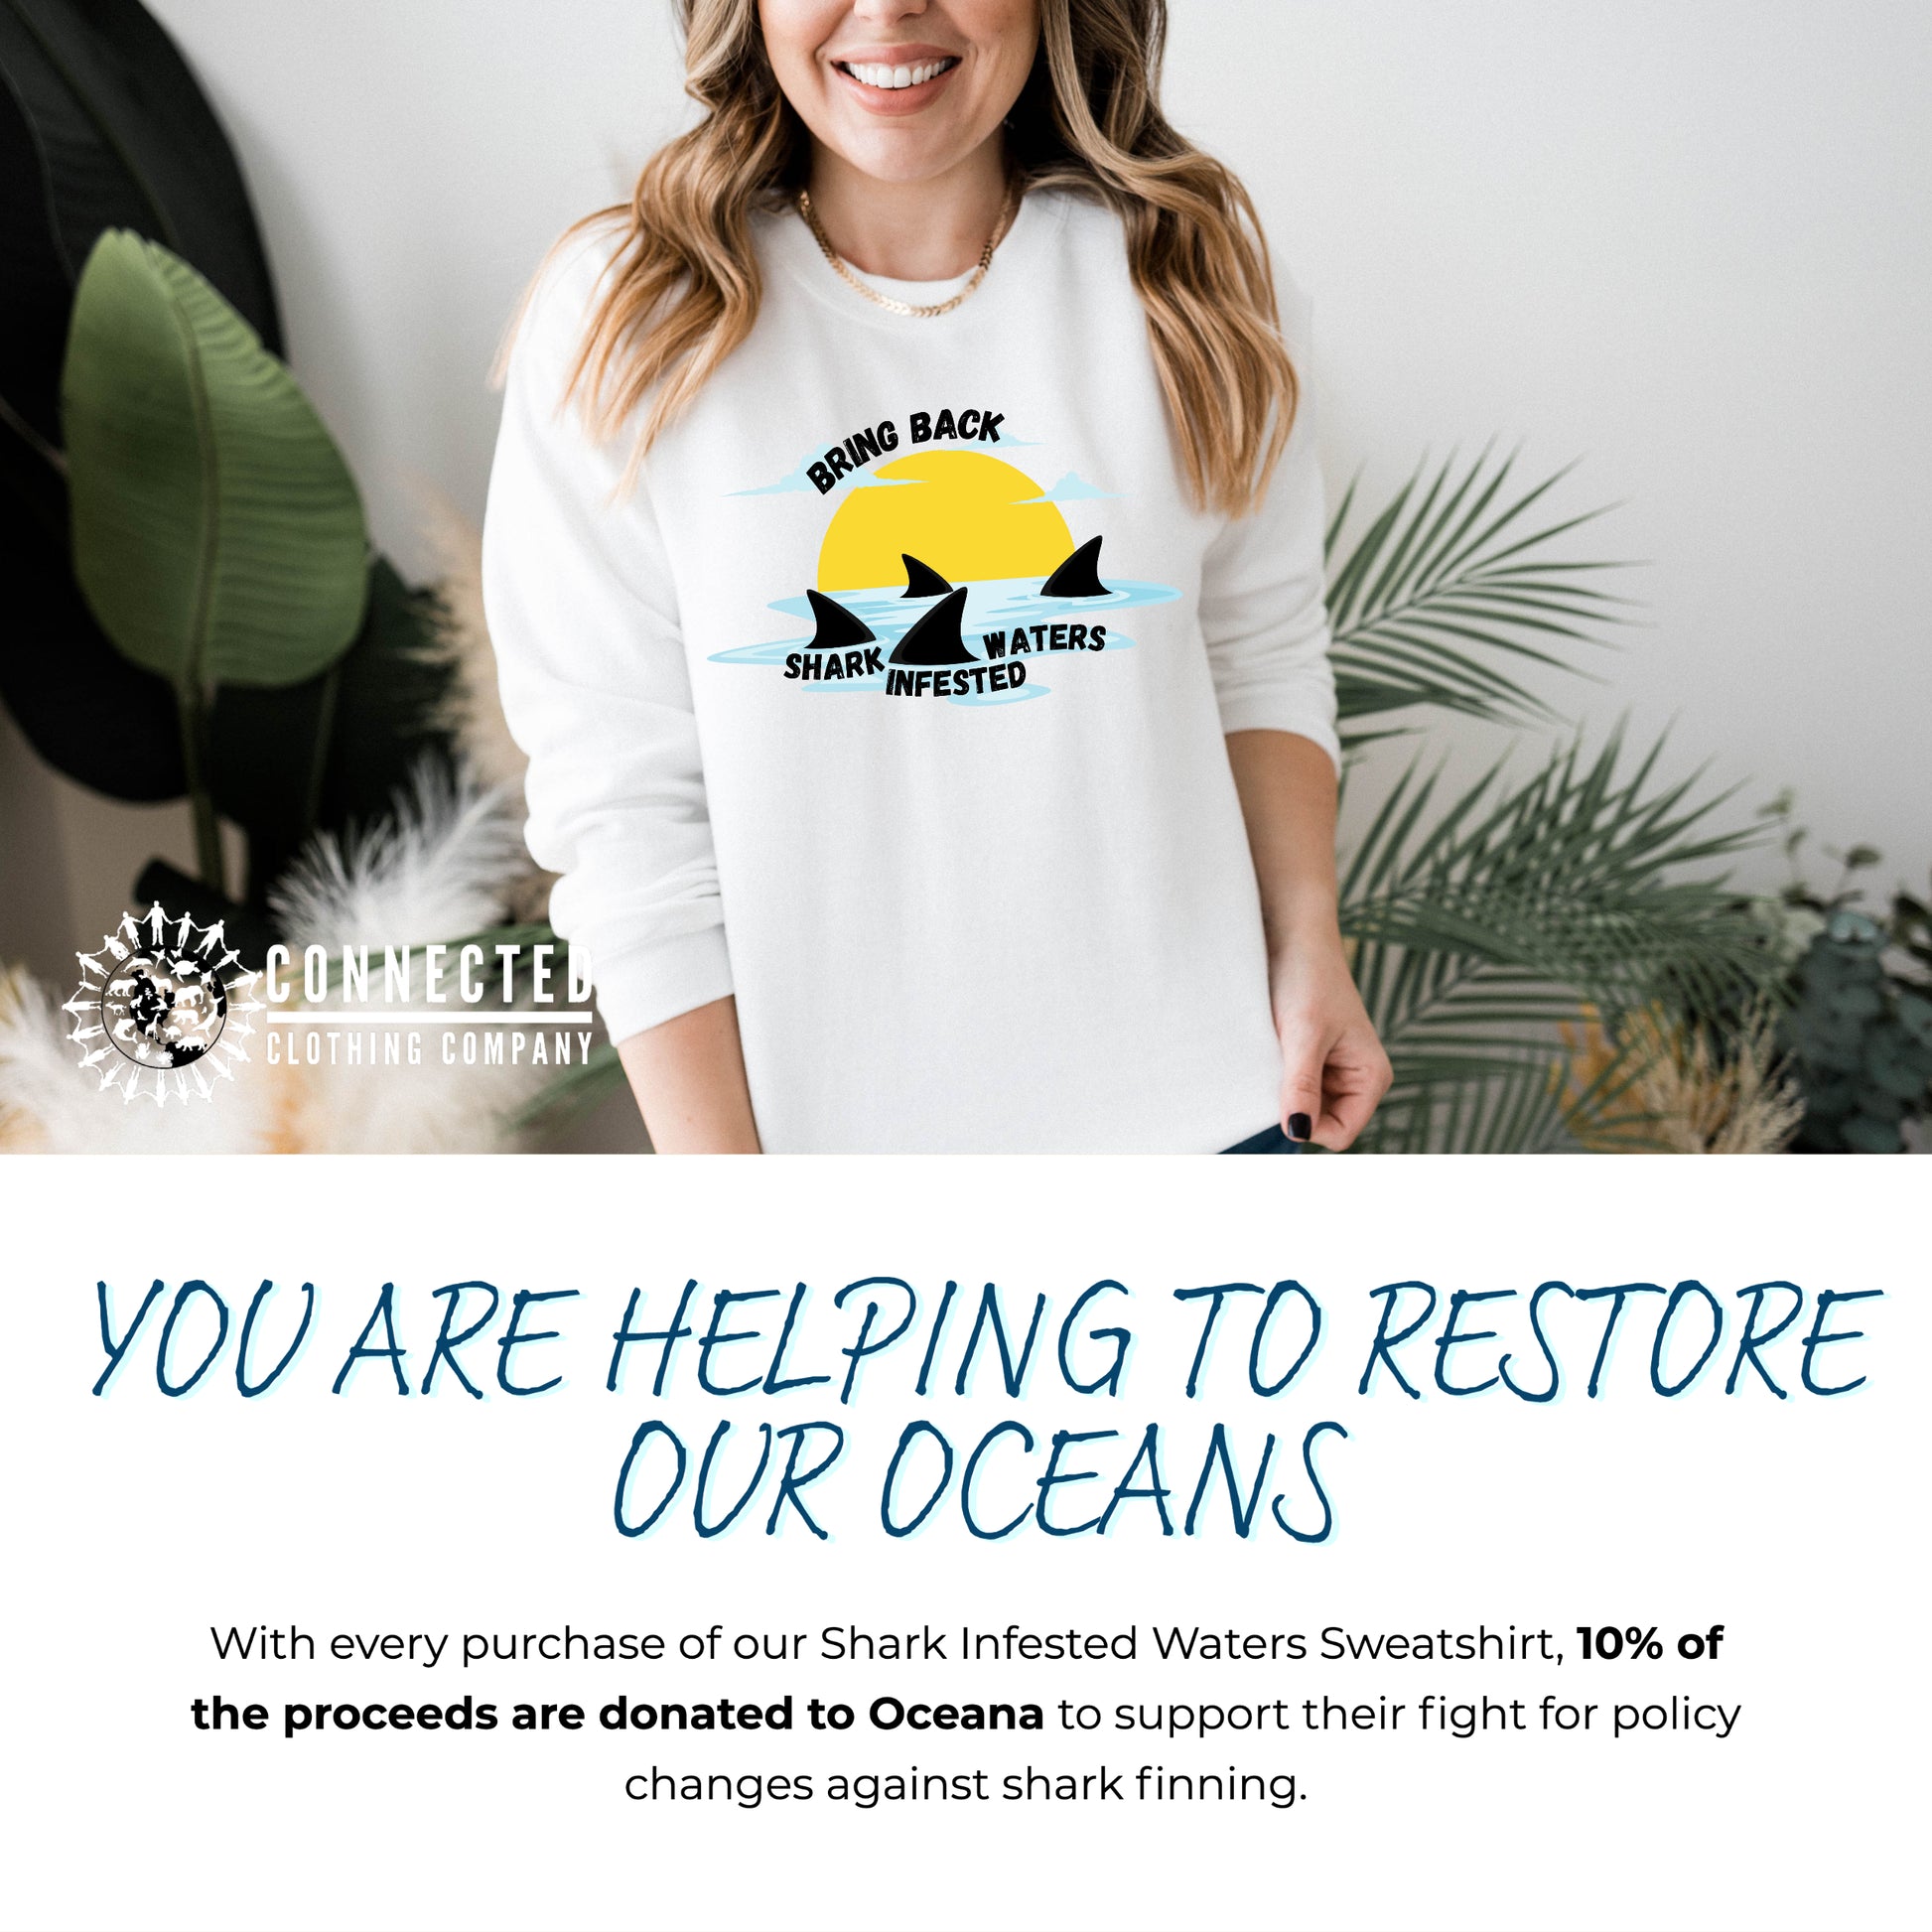 Black Bring Back Shark Infested Waters Unisex Crewneck Sweatshirt - Connected Clothing Company - Ethically and Sustainably Made - 10% of profits donated to shark conservation and ocean conservation